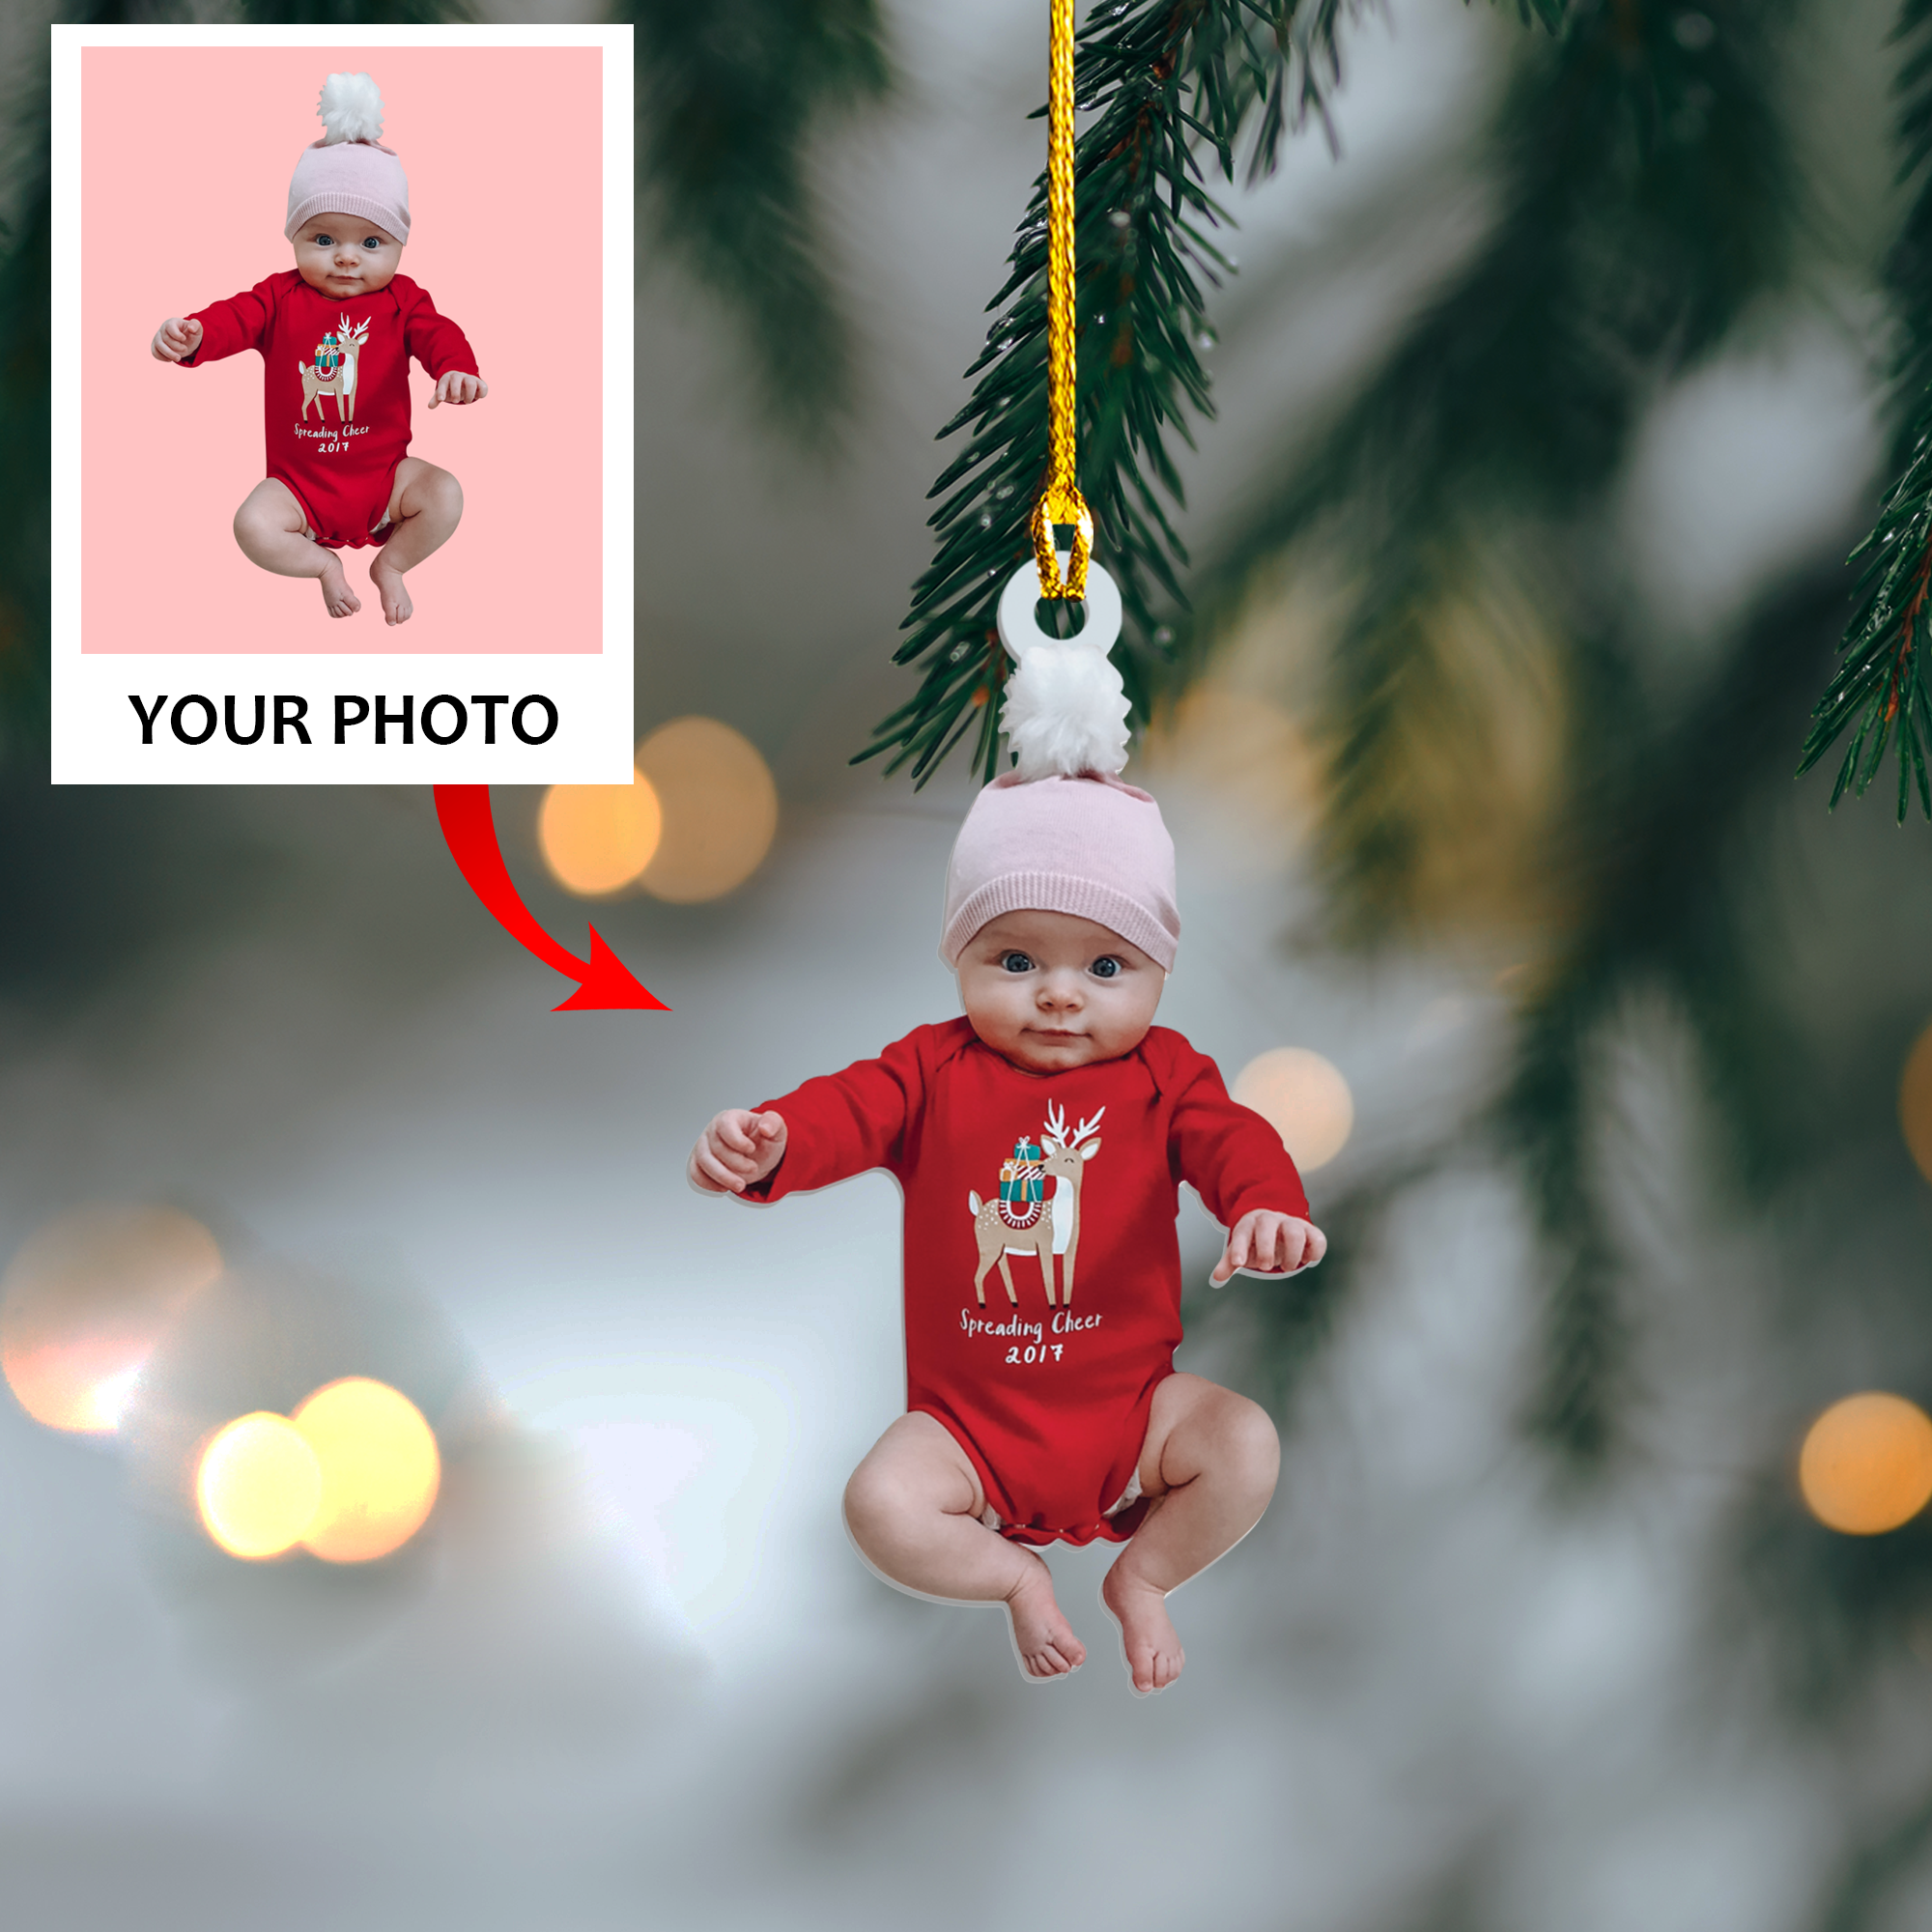 Personalized Photo Ornament - Christmas Gift For Family Member, Friends - Customized Your Photo Baby Ornament | Kids